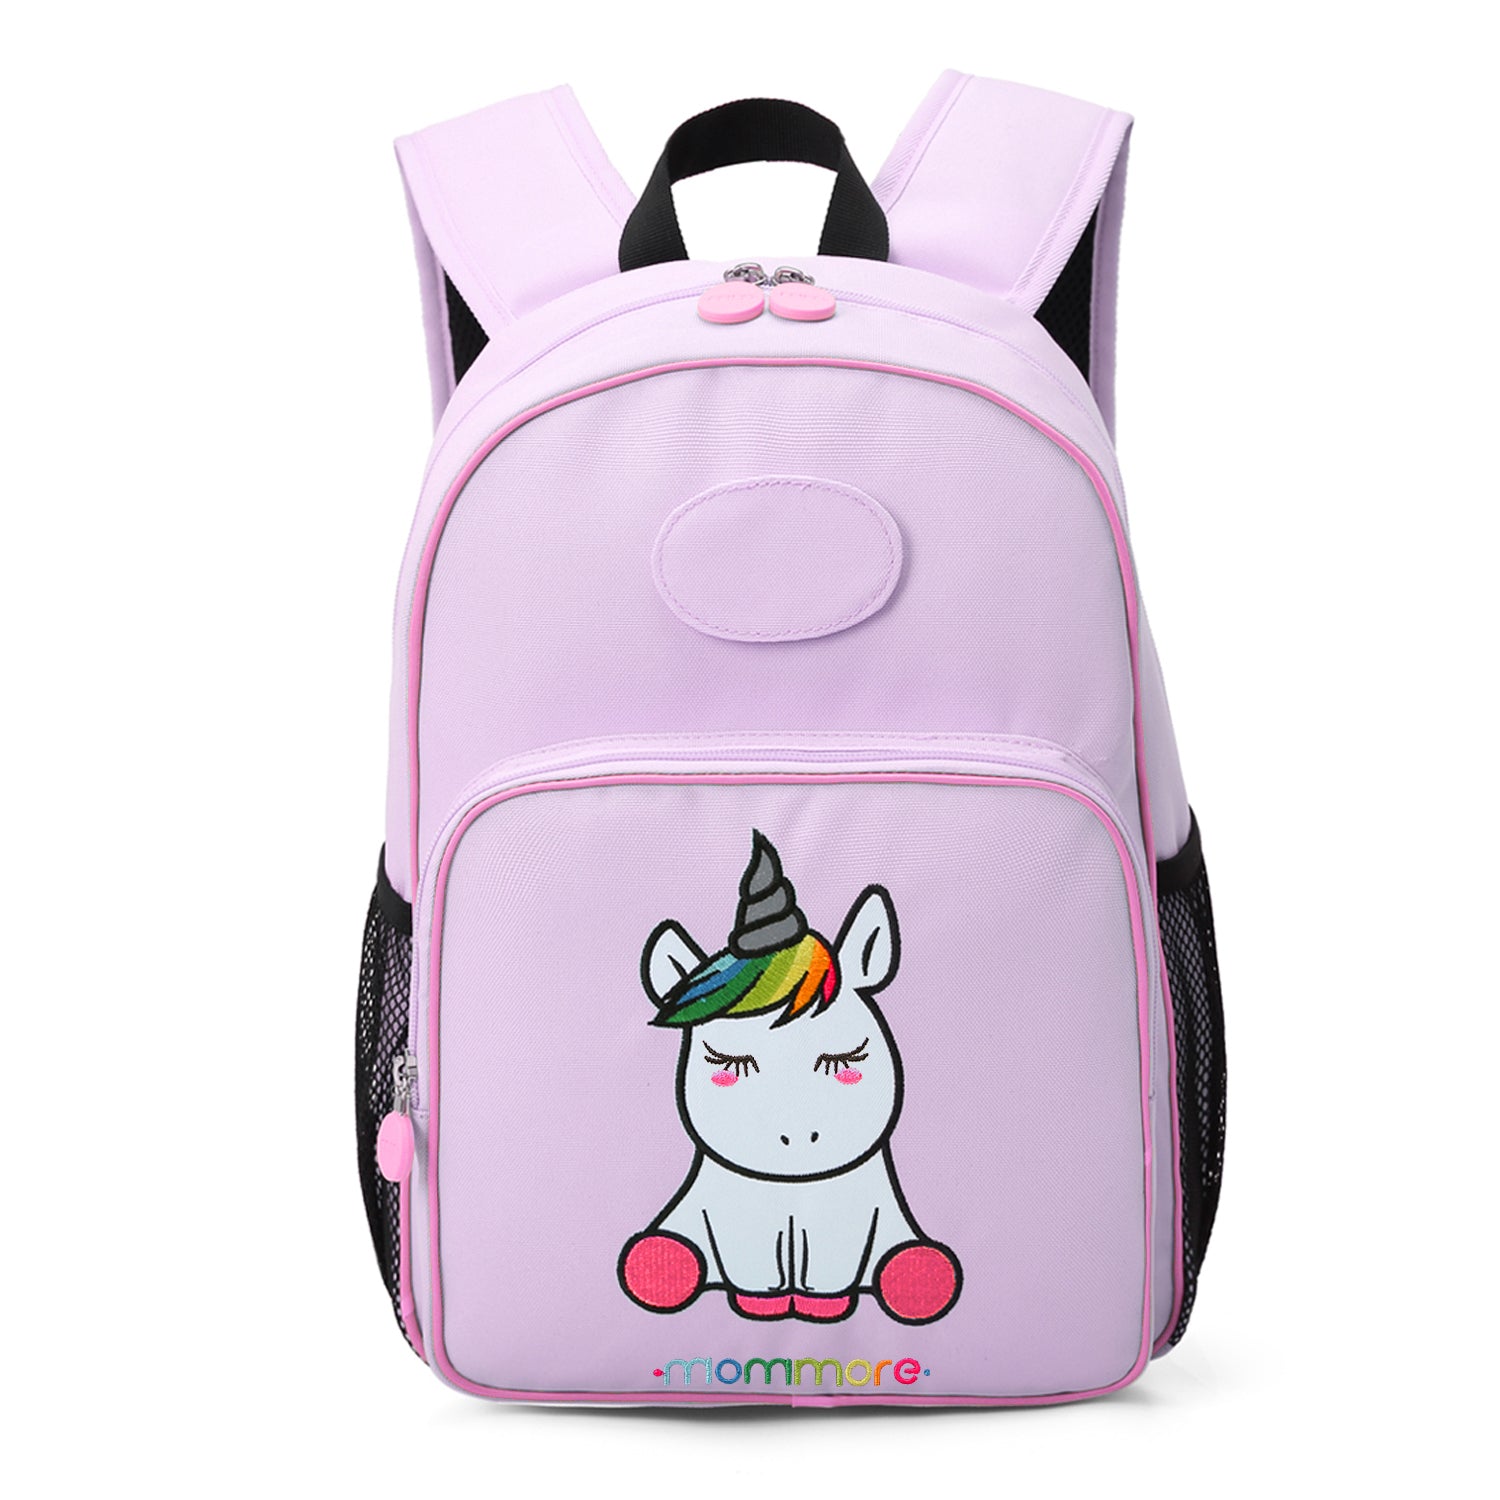 Personalized Girls Unicorn Duffel Bag or Tote Bag-small Pink 